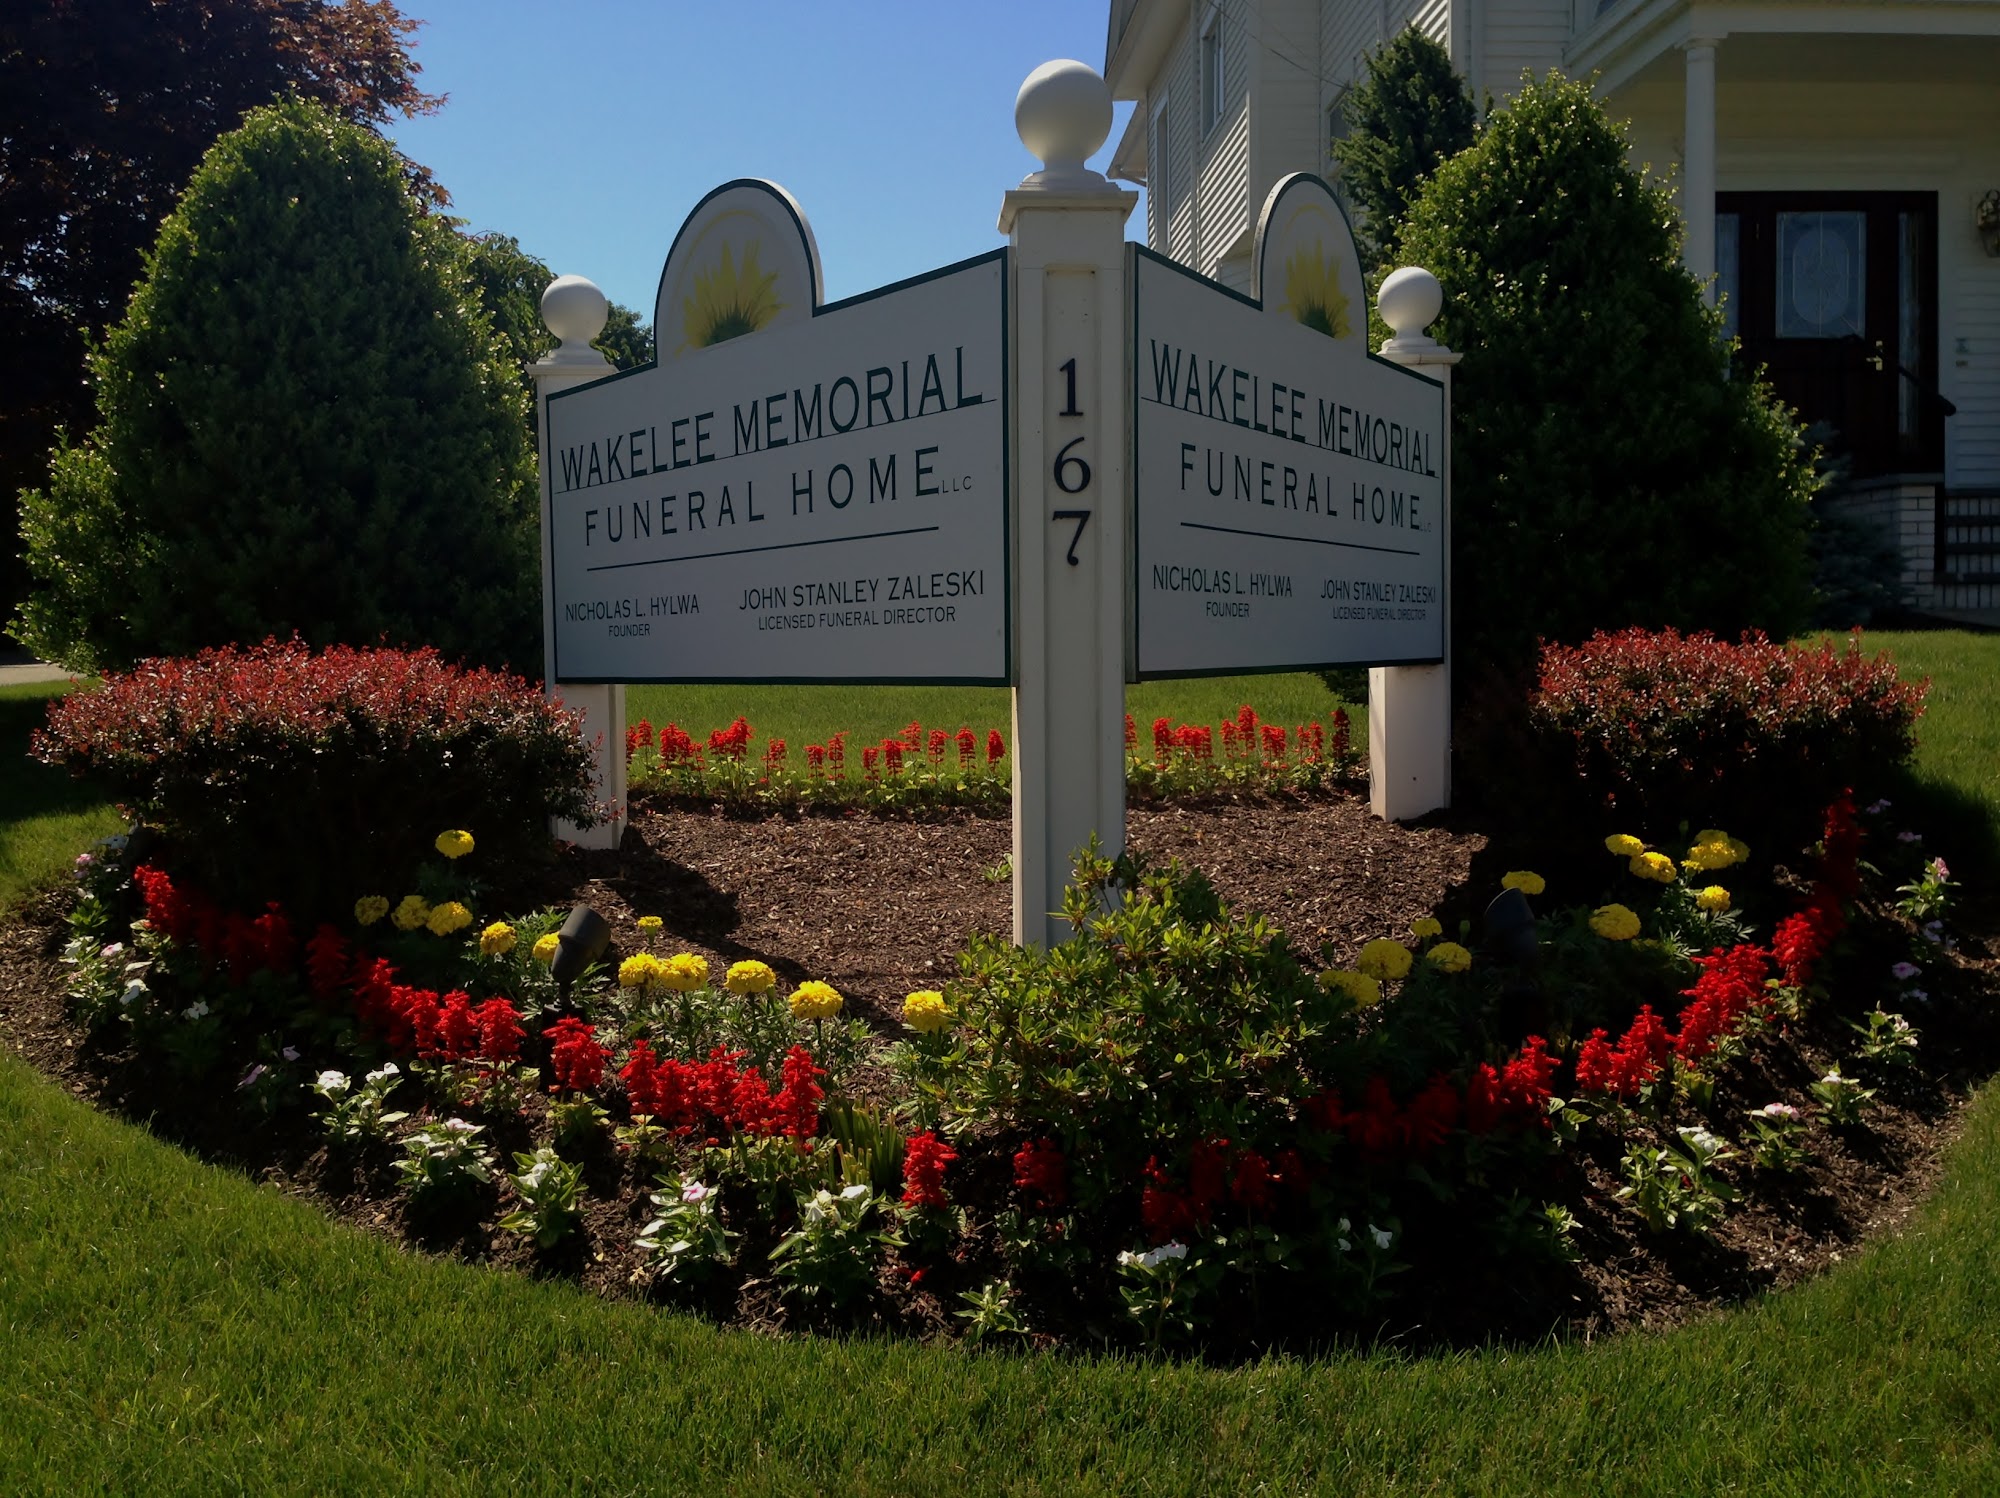 Wakelee Memorial Funeral Home 167 Wakelee Ave, Ansonia Connecticut 06401